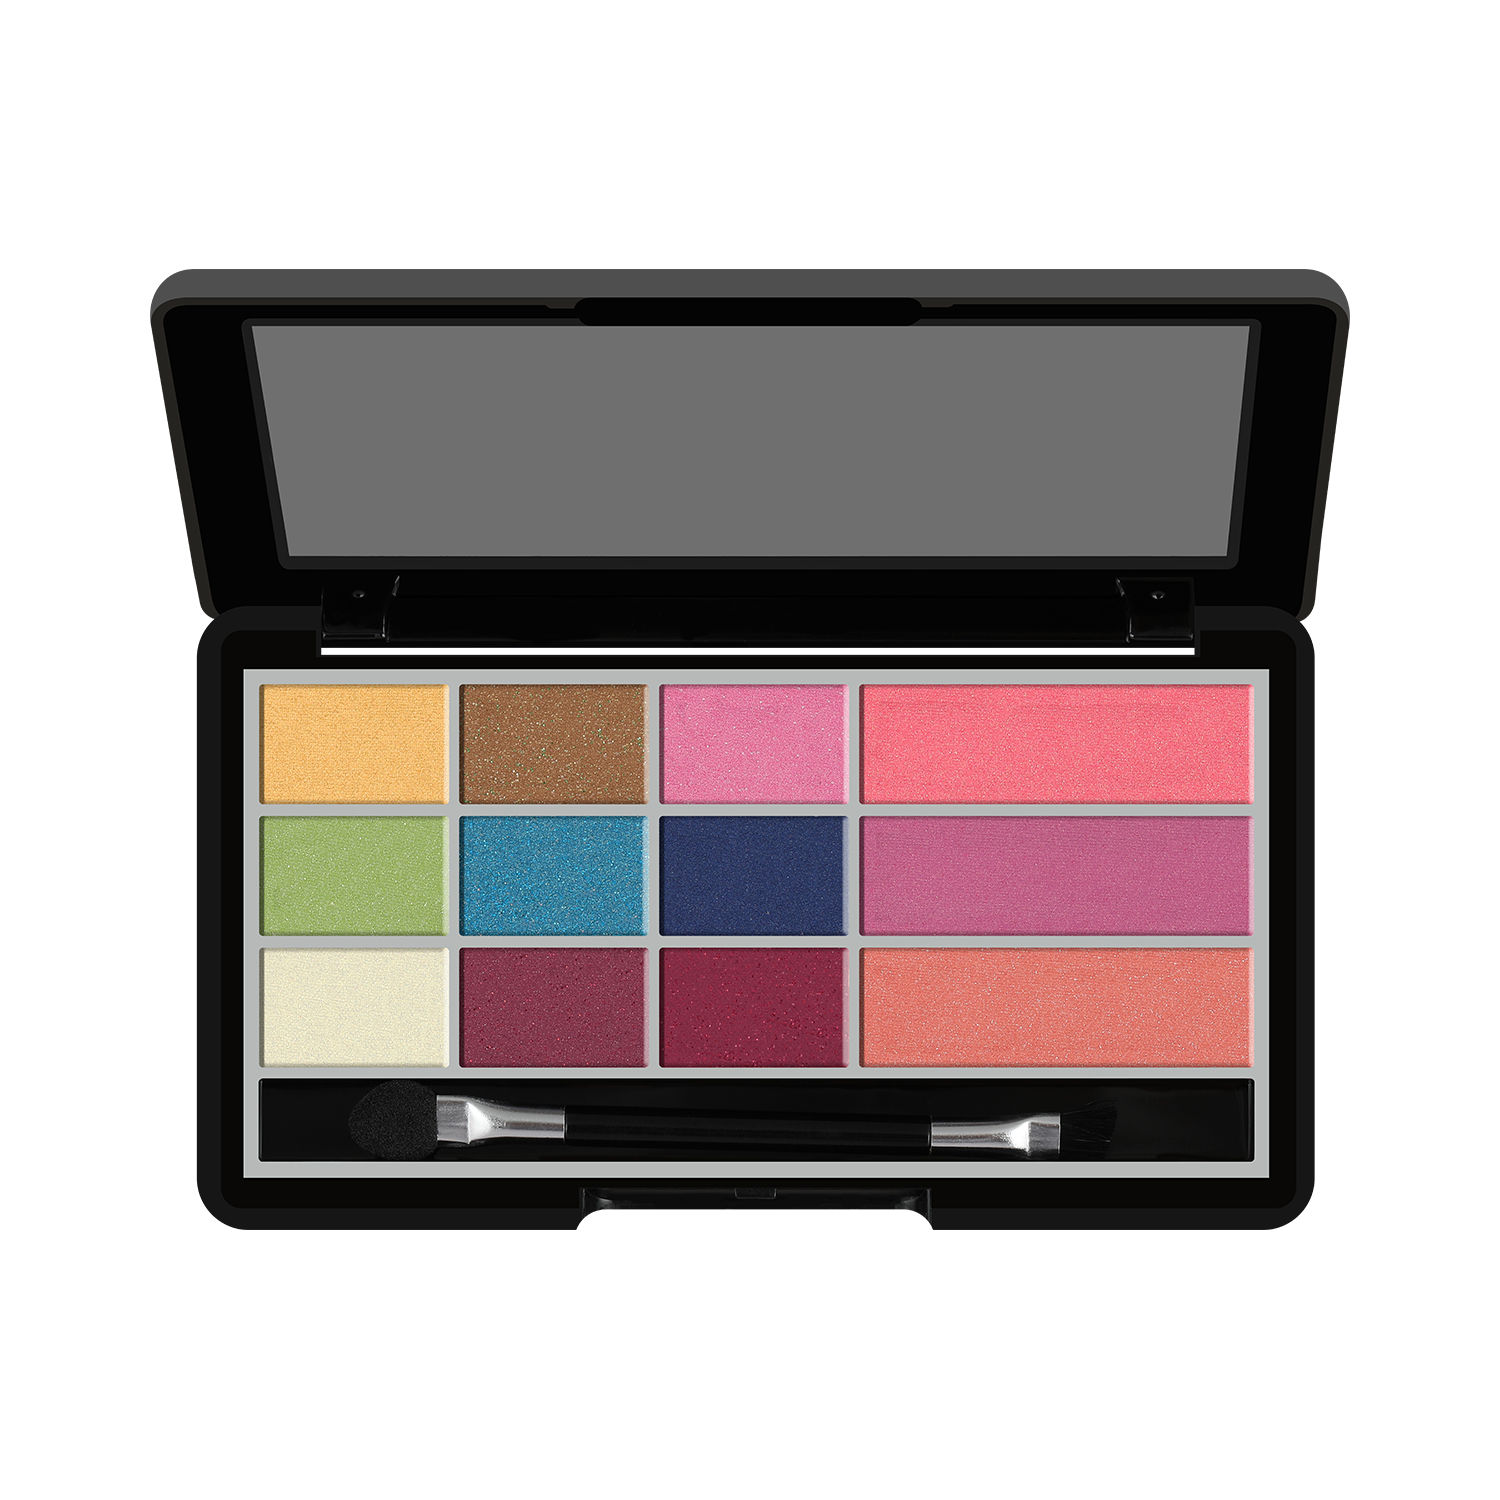 Miss Claire Make Up Palette/Kit - 9915 B-1(9.90gm)